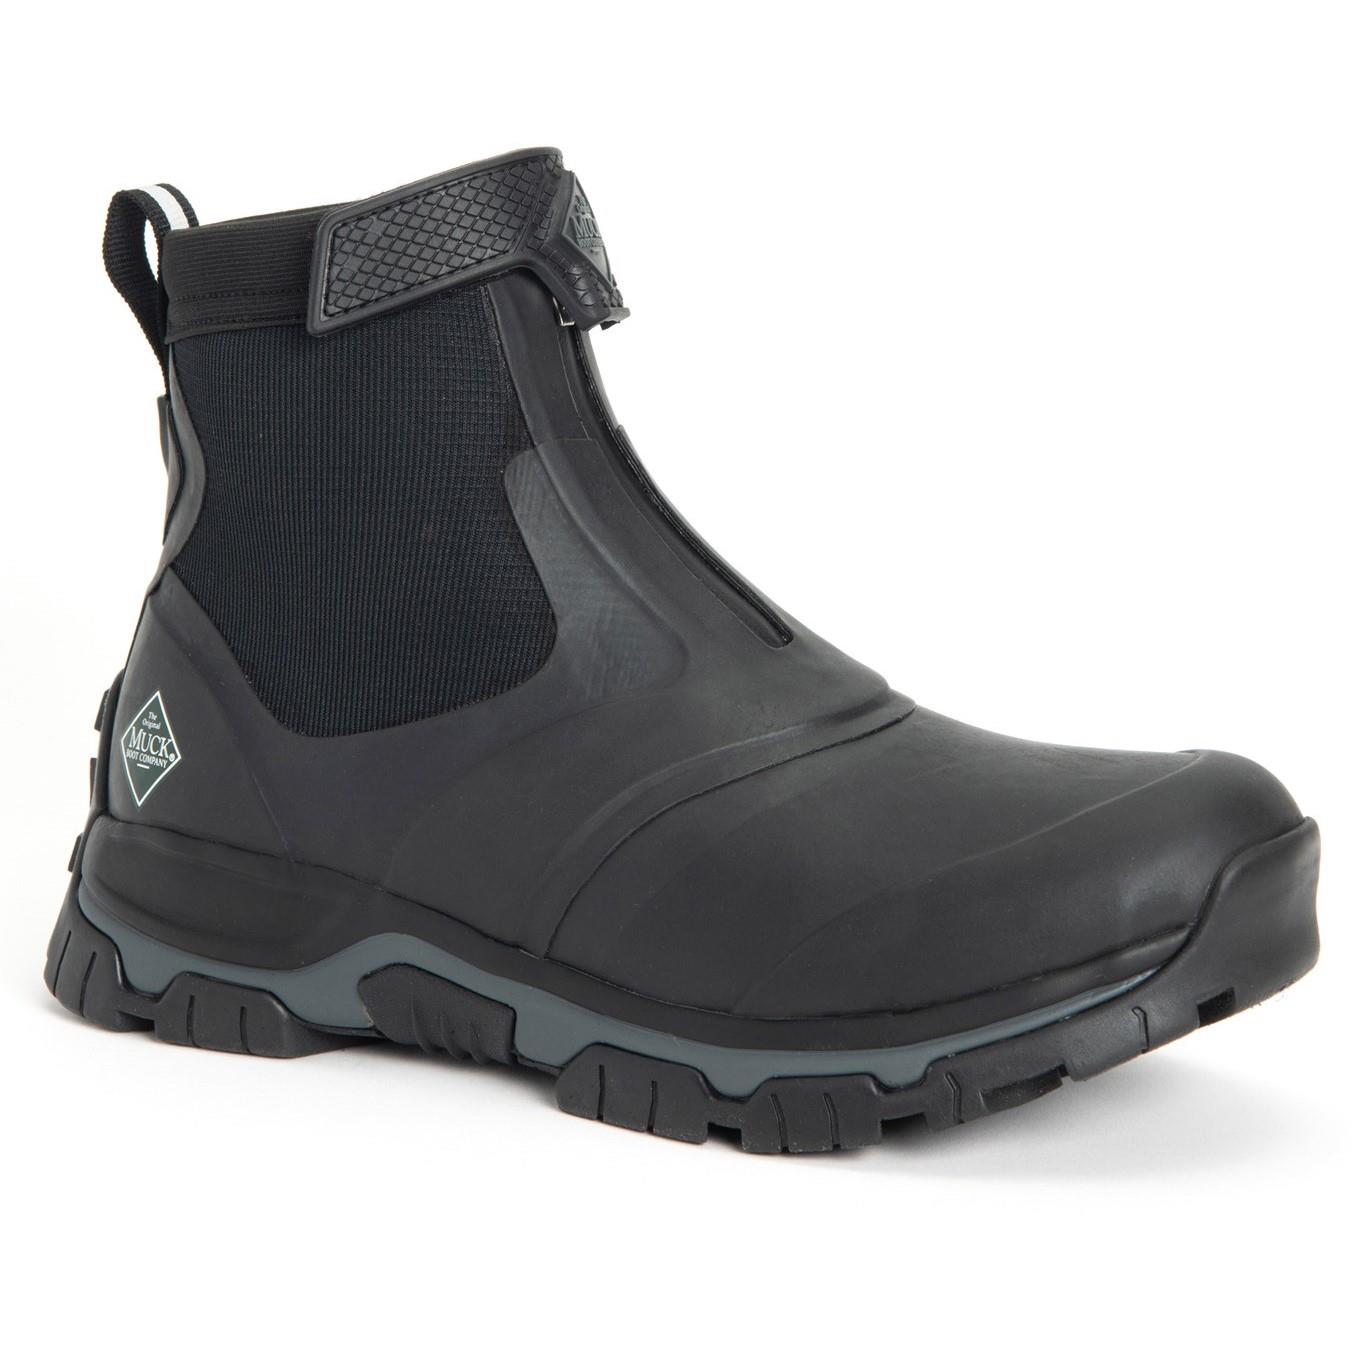 Muck Boots Apex Mid Zip black waterproof breathable ankle boots